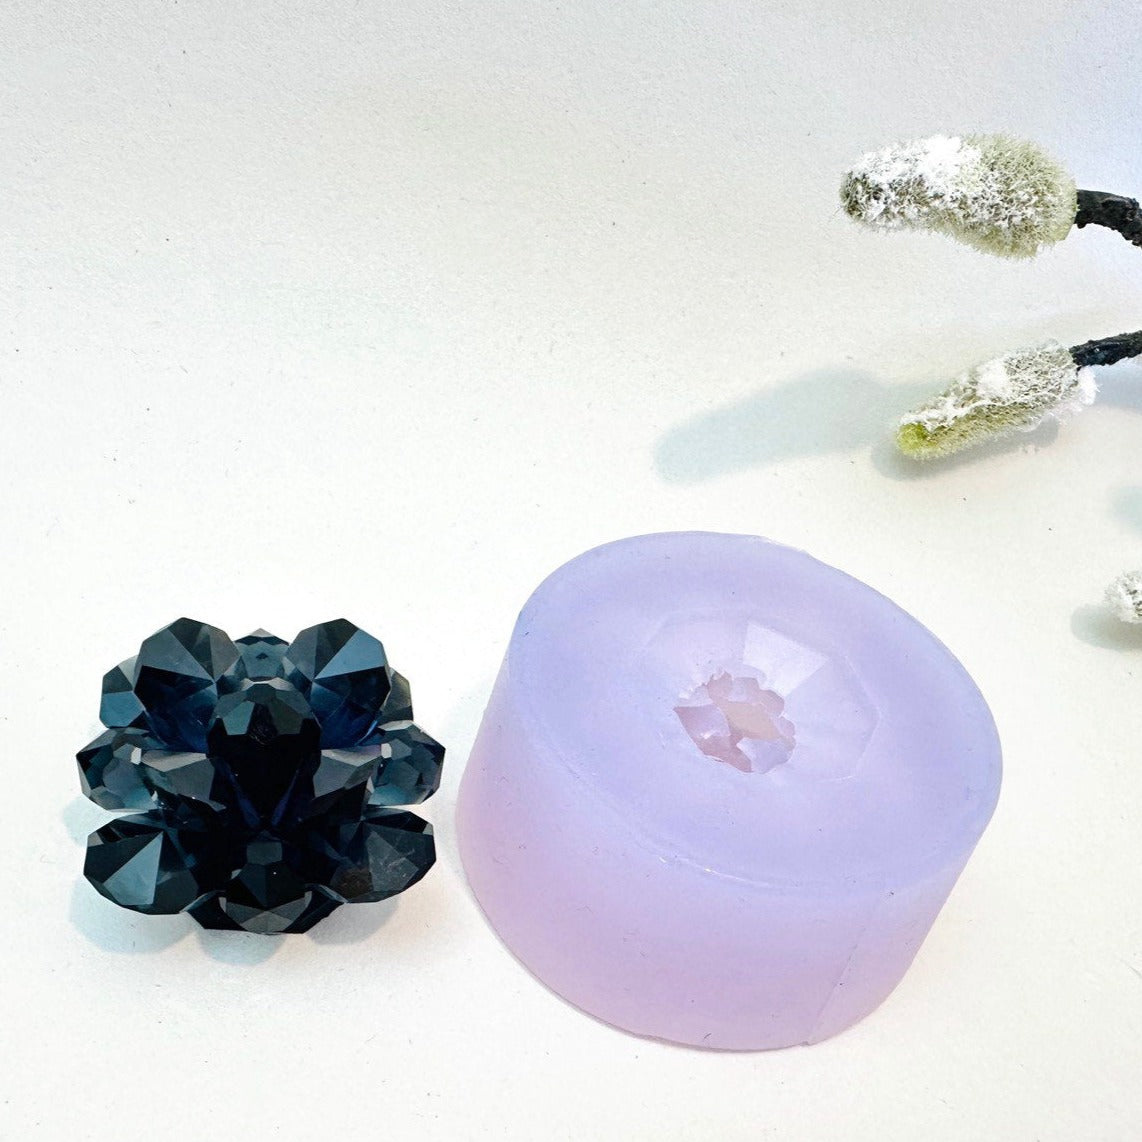 The Crystal Flower Resin Silicone Mold